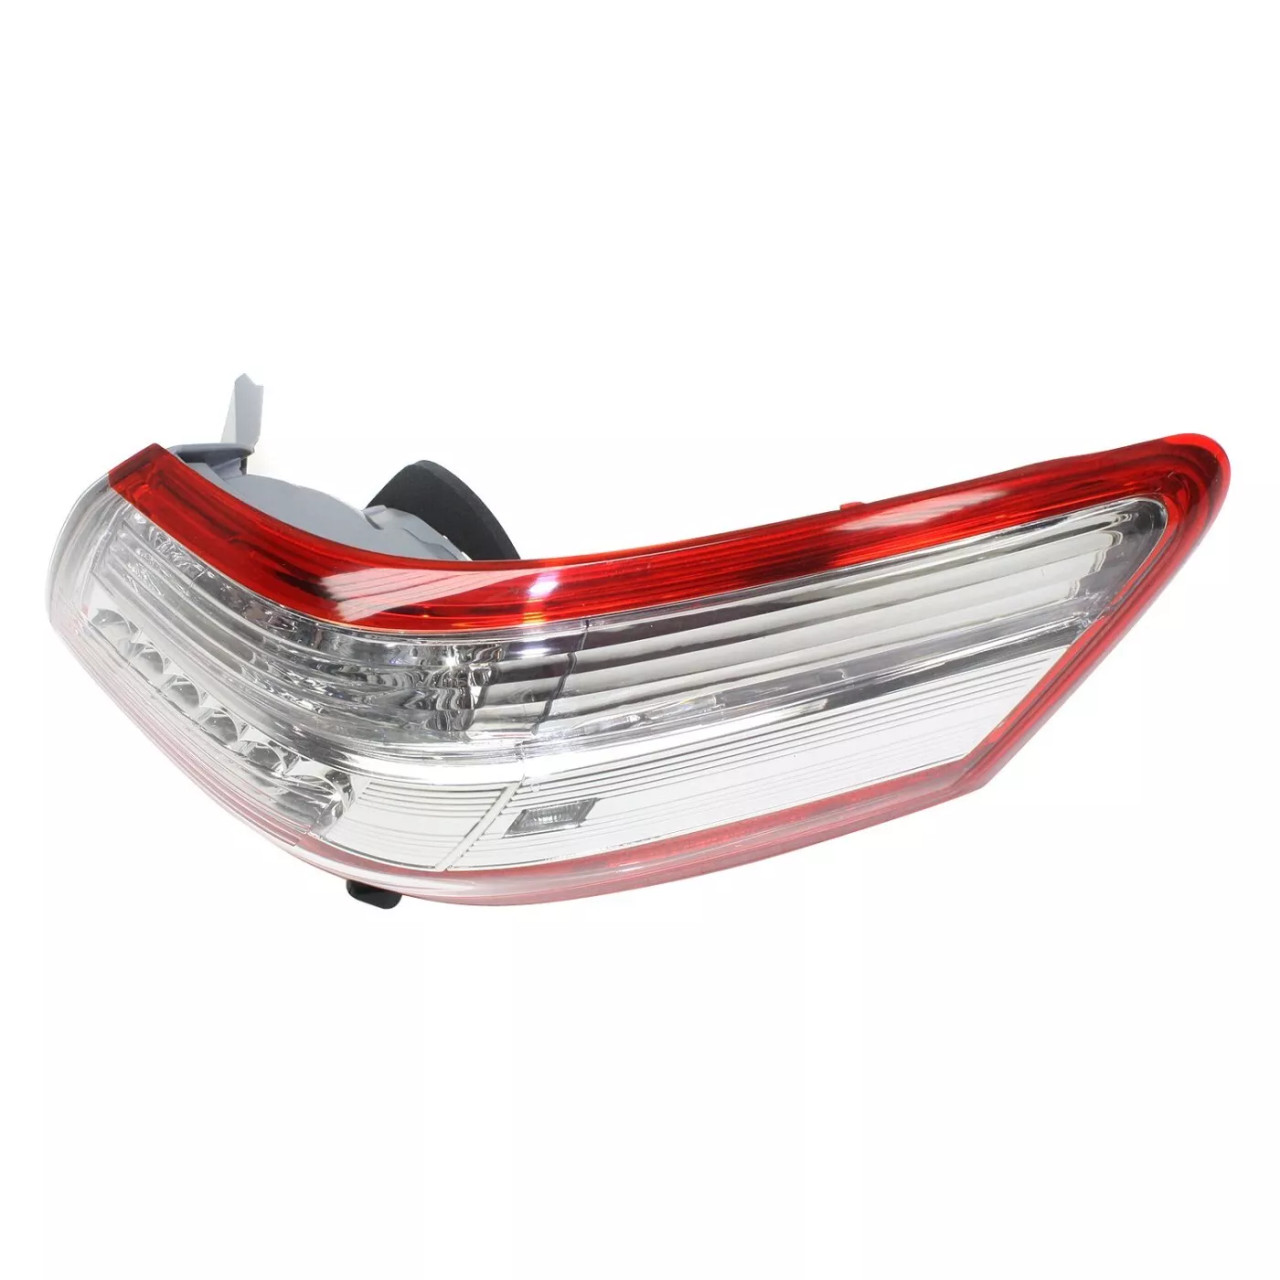 Halogen Tail Light Set For 2010-2011 Toyota Camry Hybrid Outer Clear/Red 2Pcs